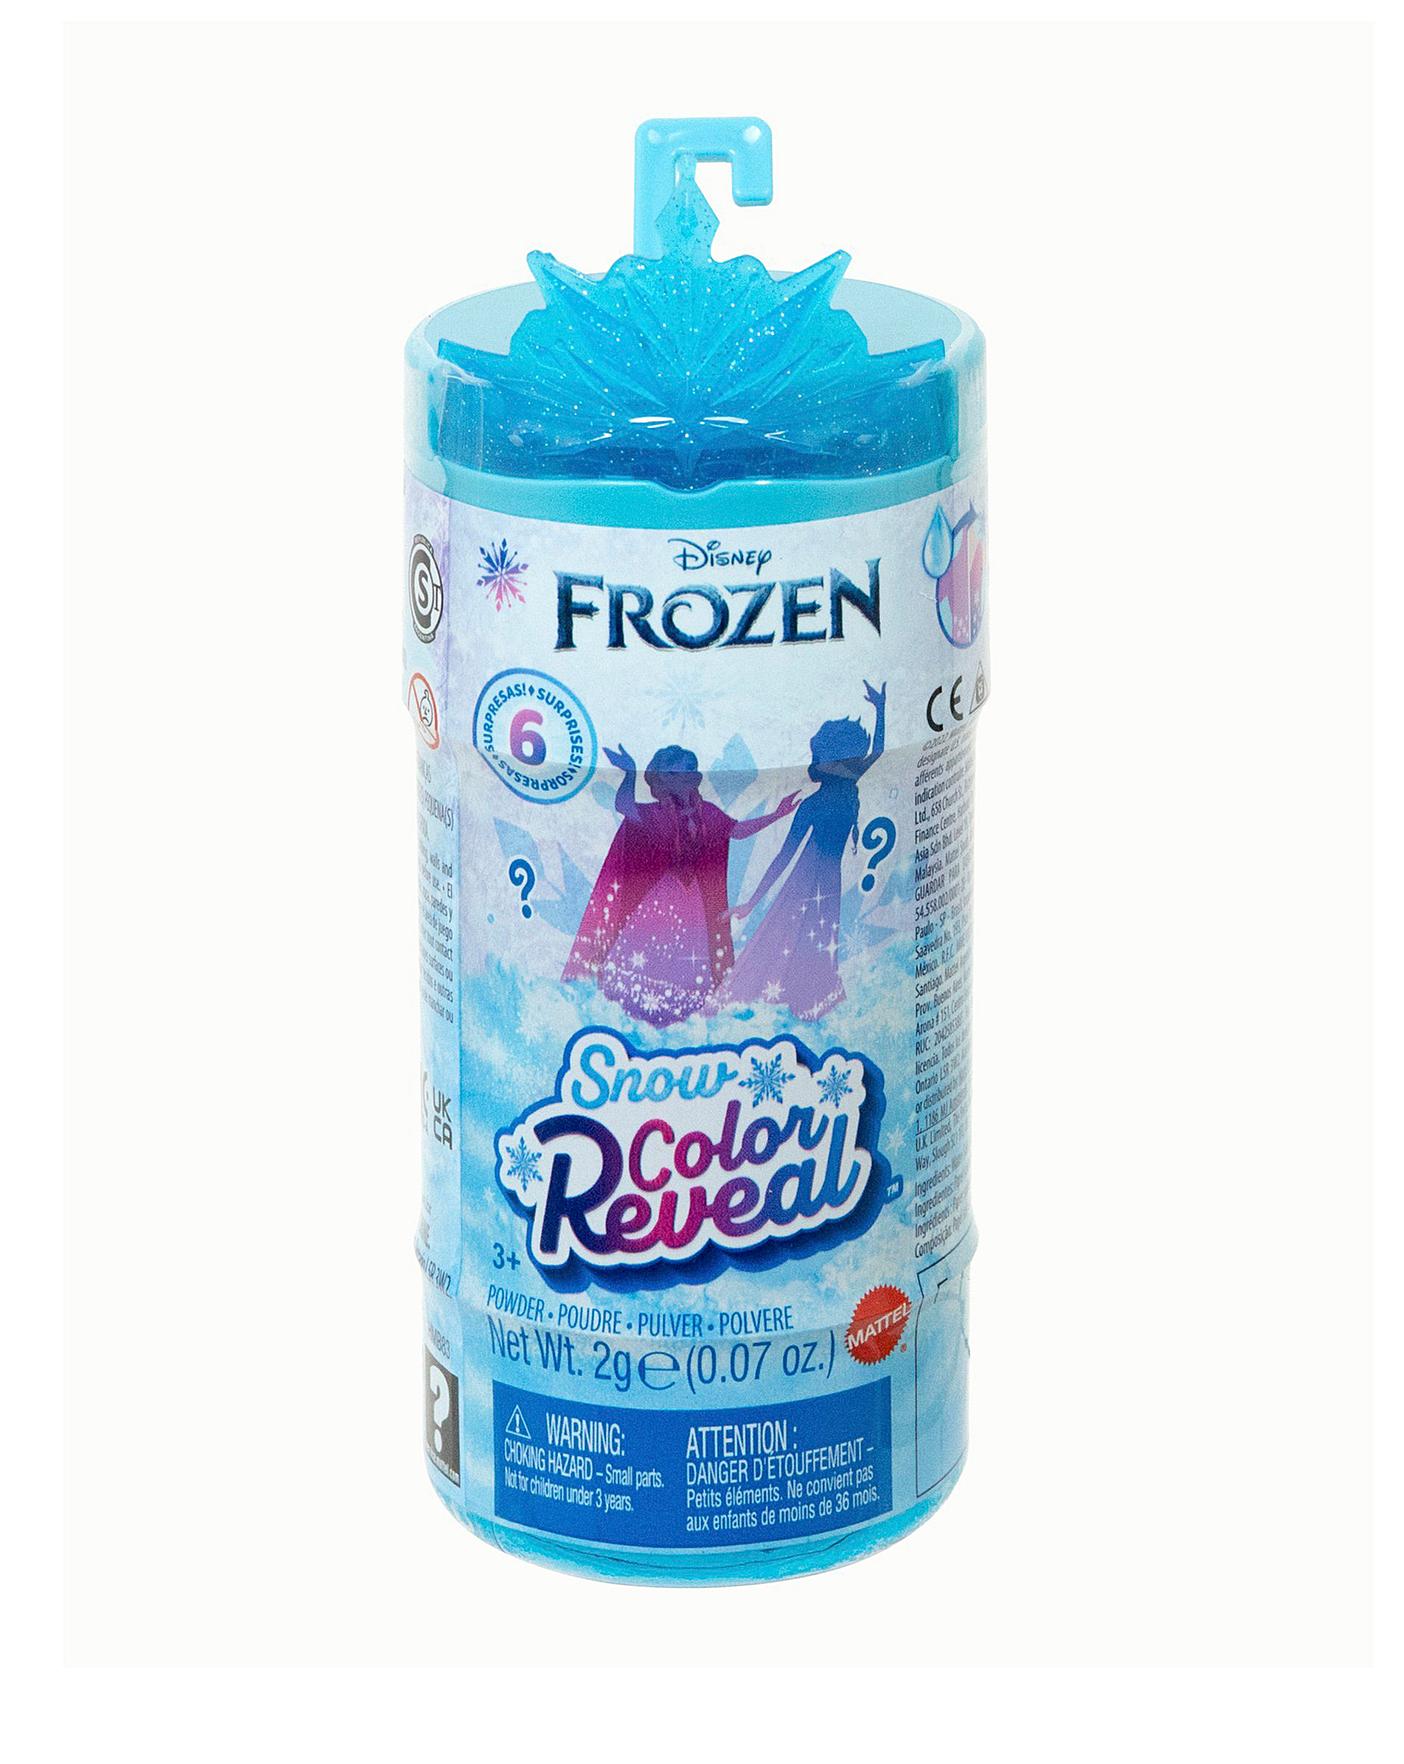 Frozen 2 Small Doll Snow Colour Reveal